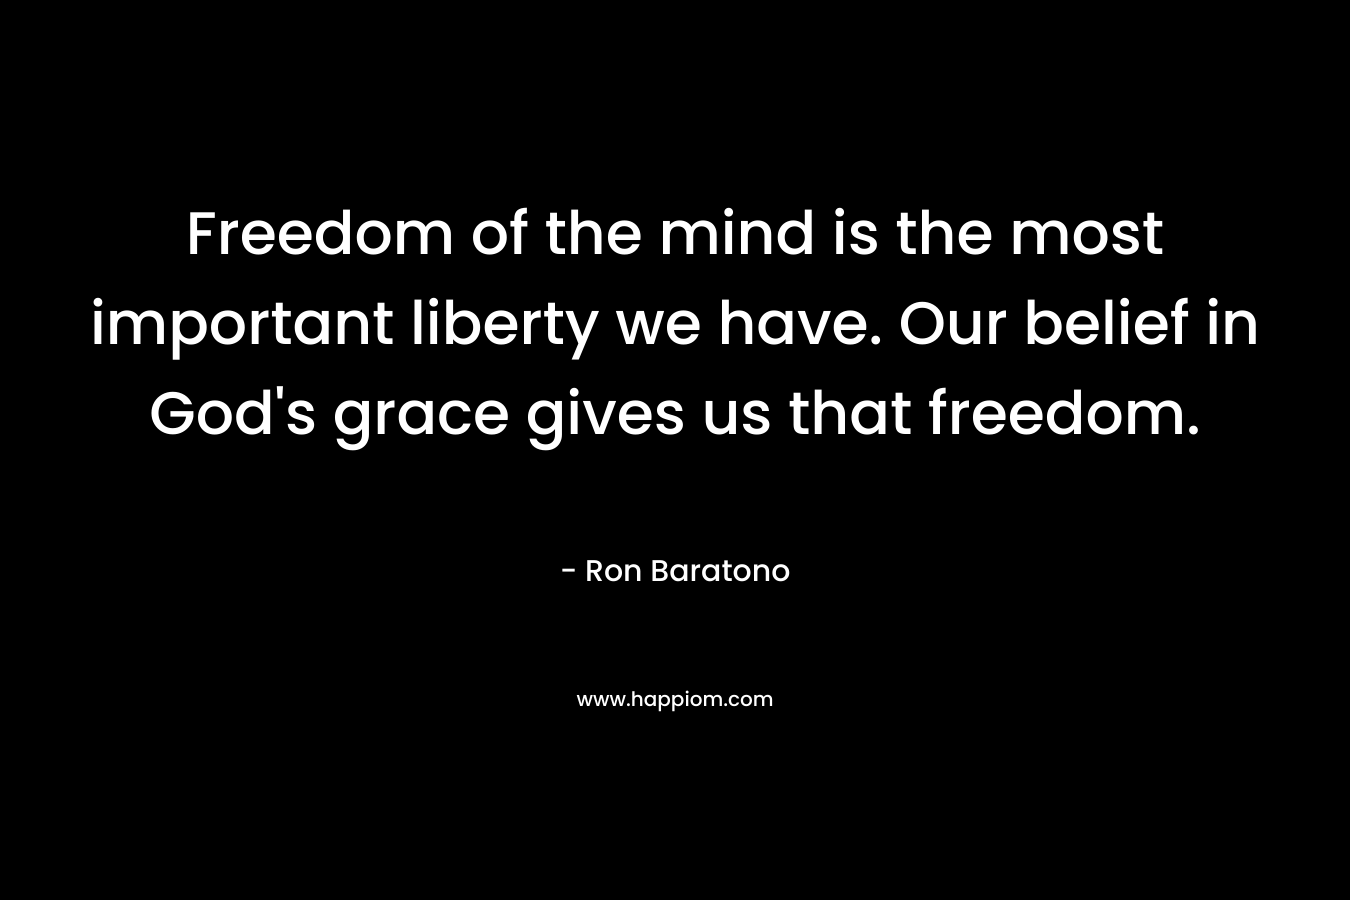 Freedom of the mind is the most important liberty we have. Our belief in God's grace gives us that freedom.